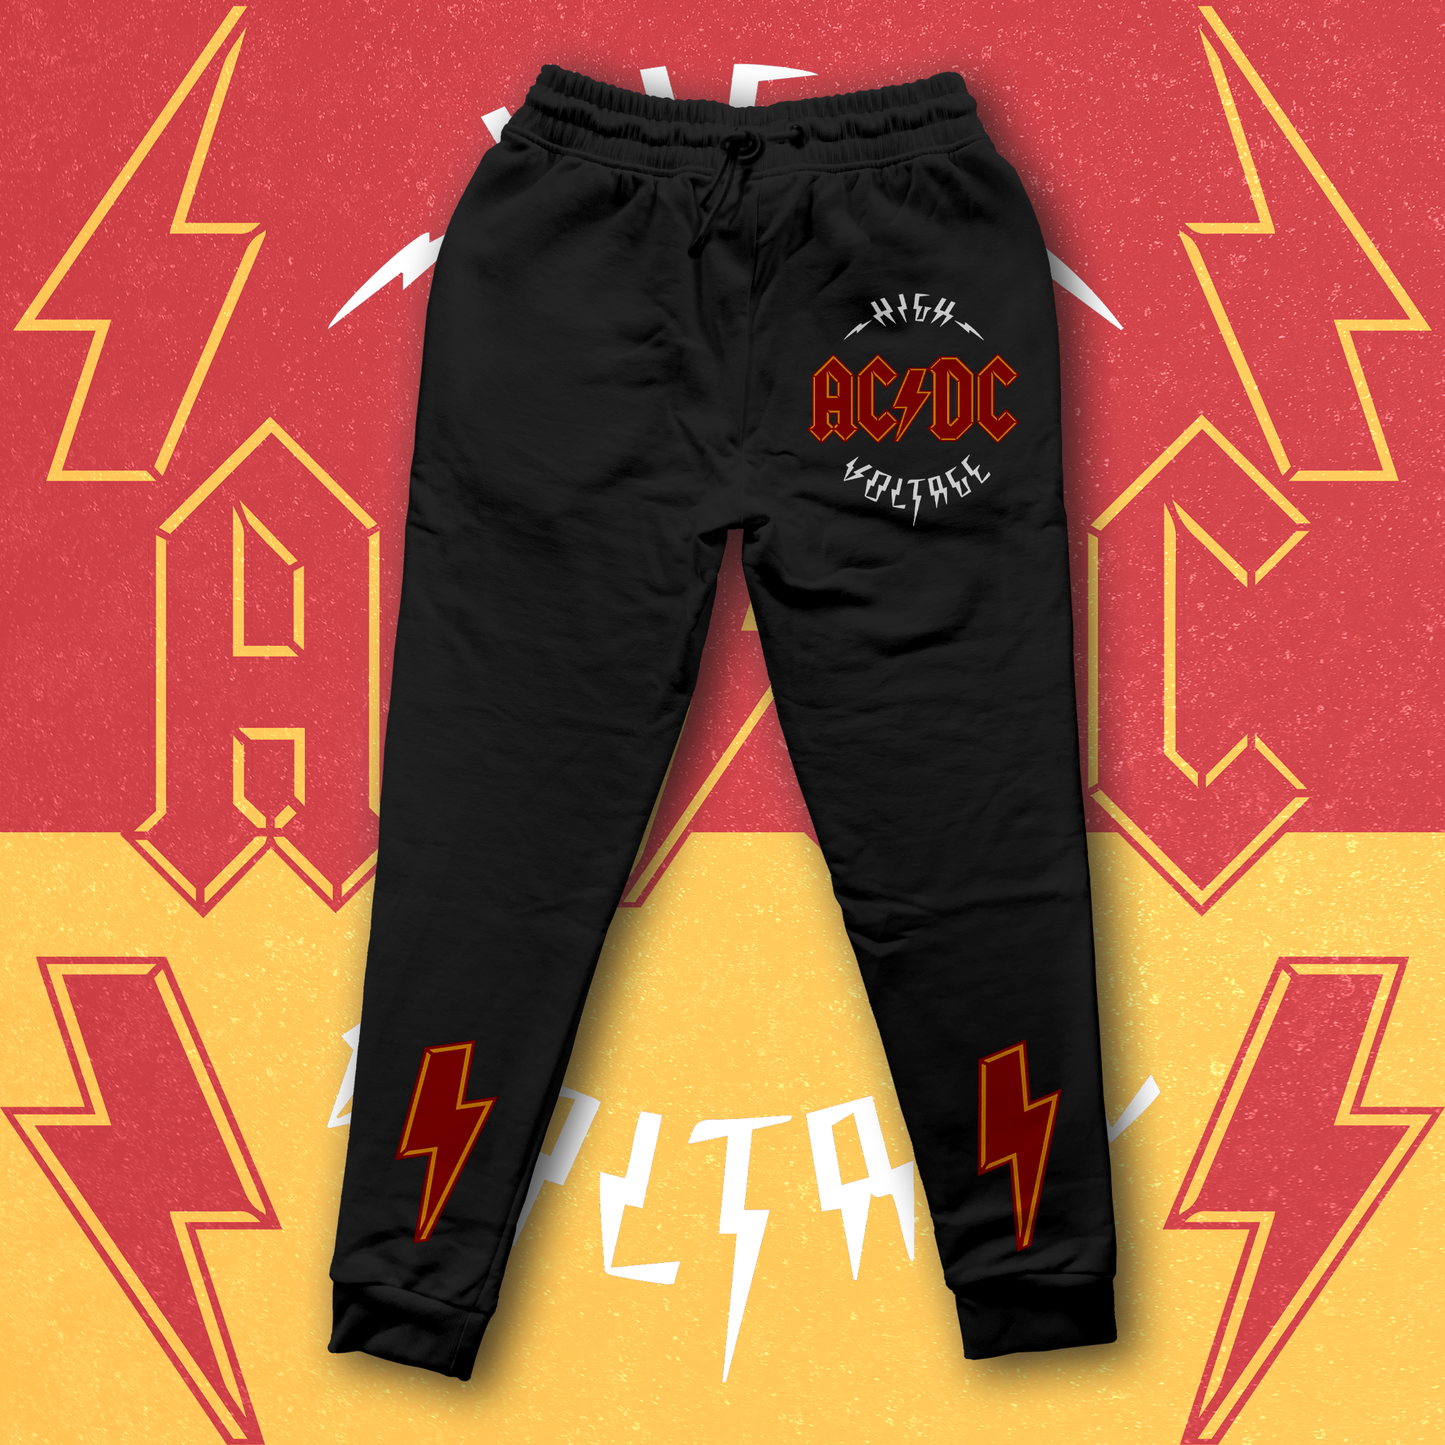 ACDC Jogger Pants